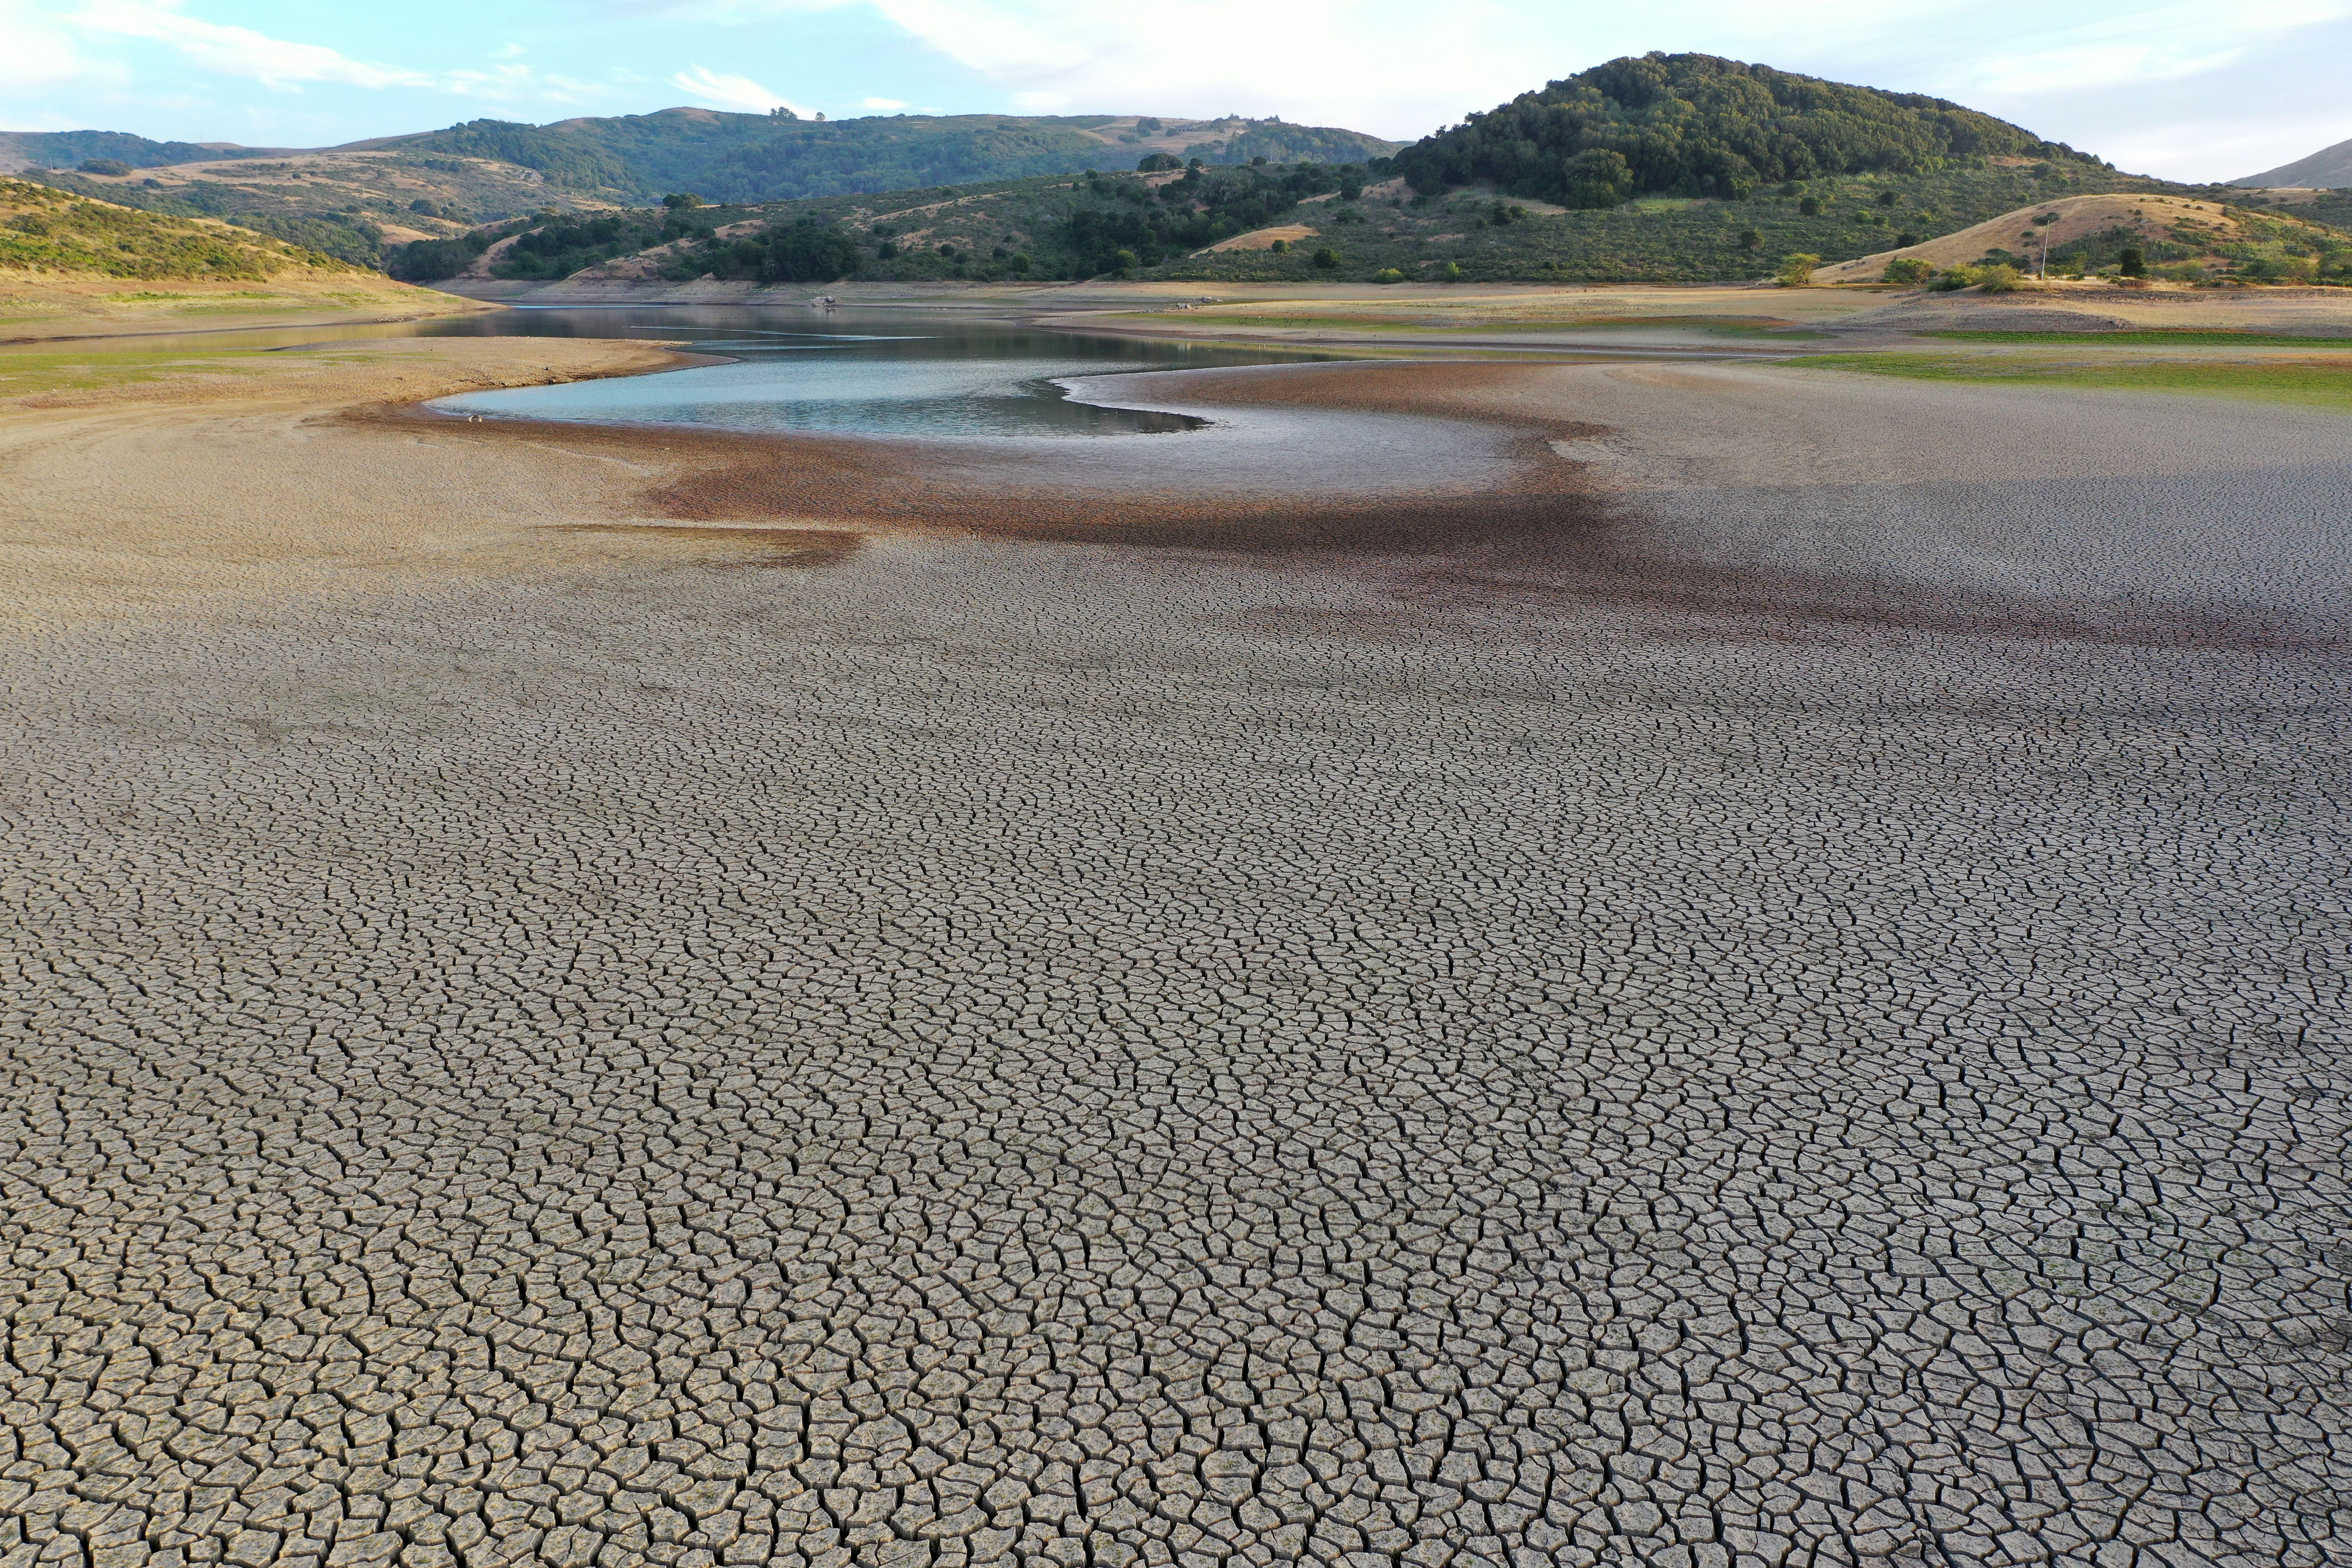 Dry cracked earth is visible at Nicasio Reservoir on June 16, 2021 in Marin County, California, which is under mandatory water-use restrictions 